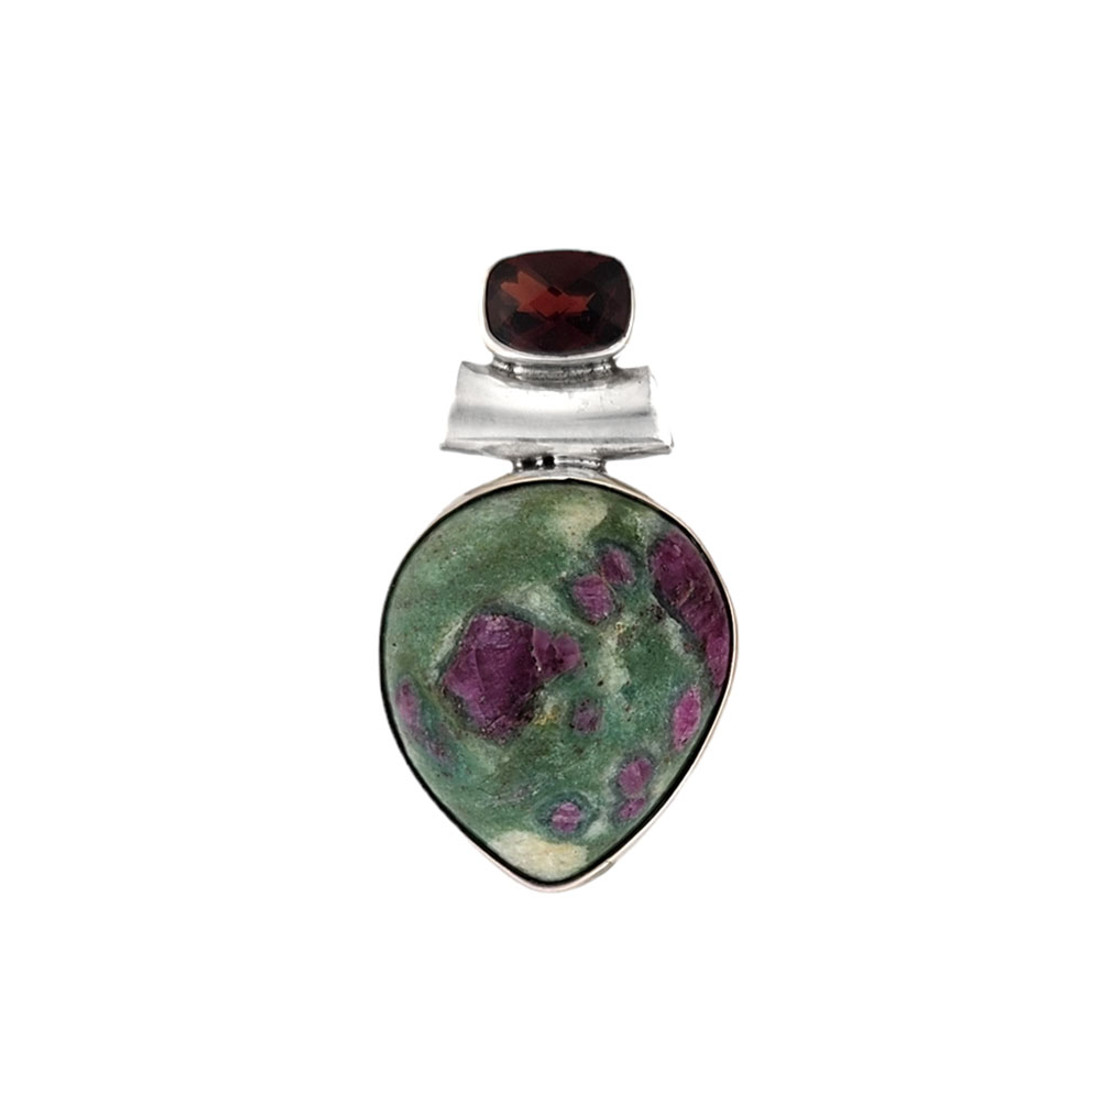 Ruby Ziosite and Garnet sterling silver pendant. 